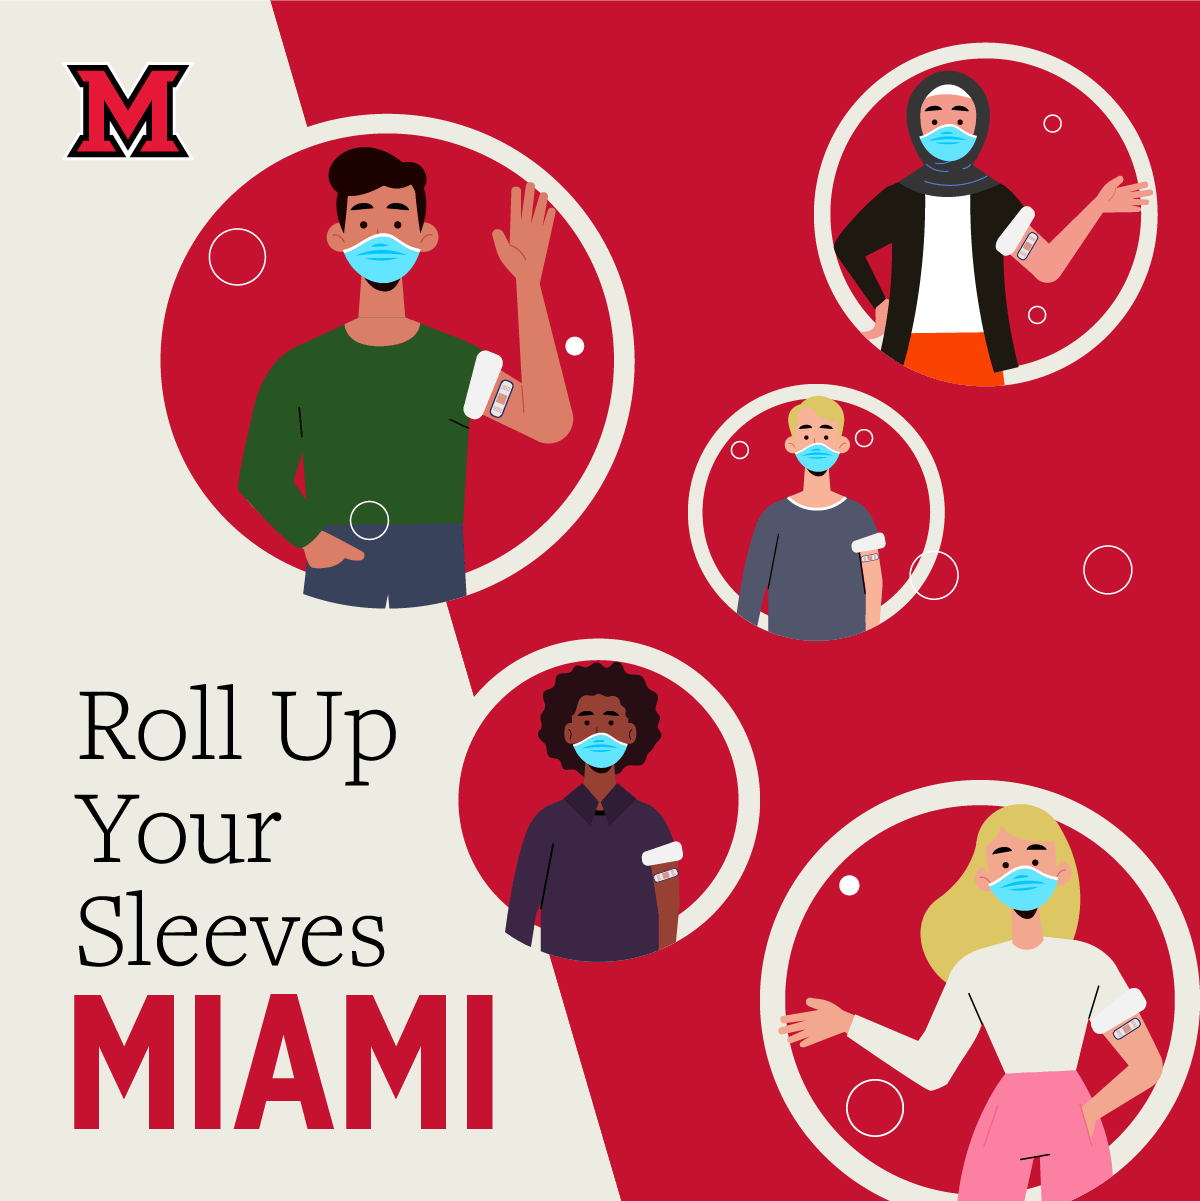 Roll Up Your Sleeves Miami